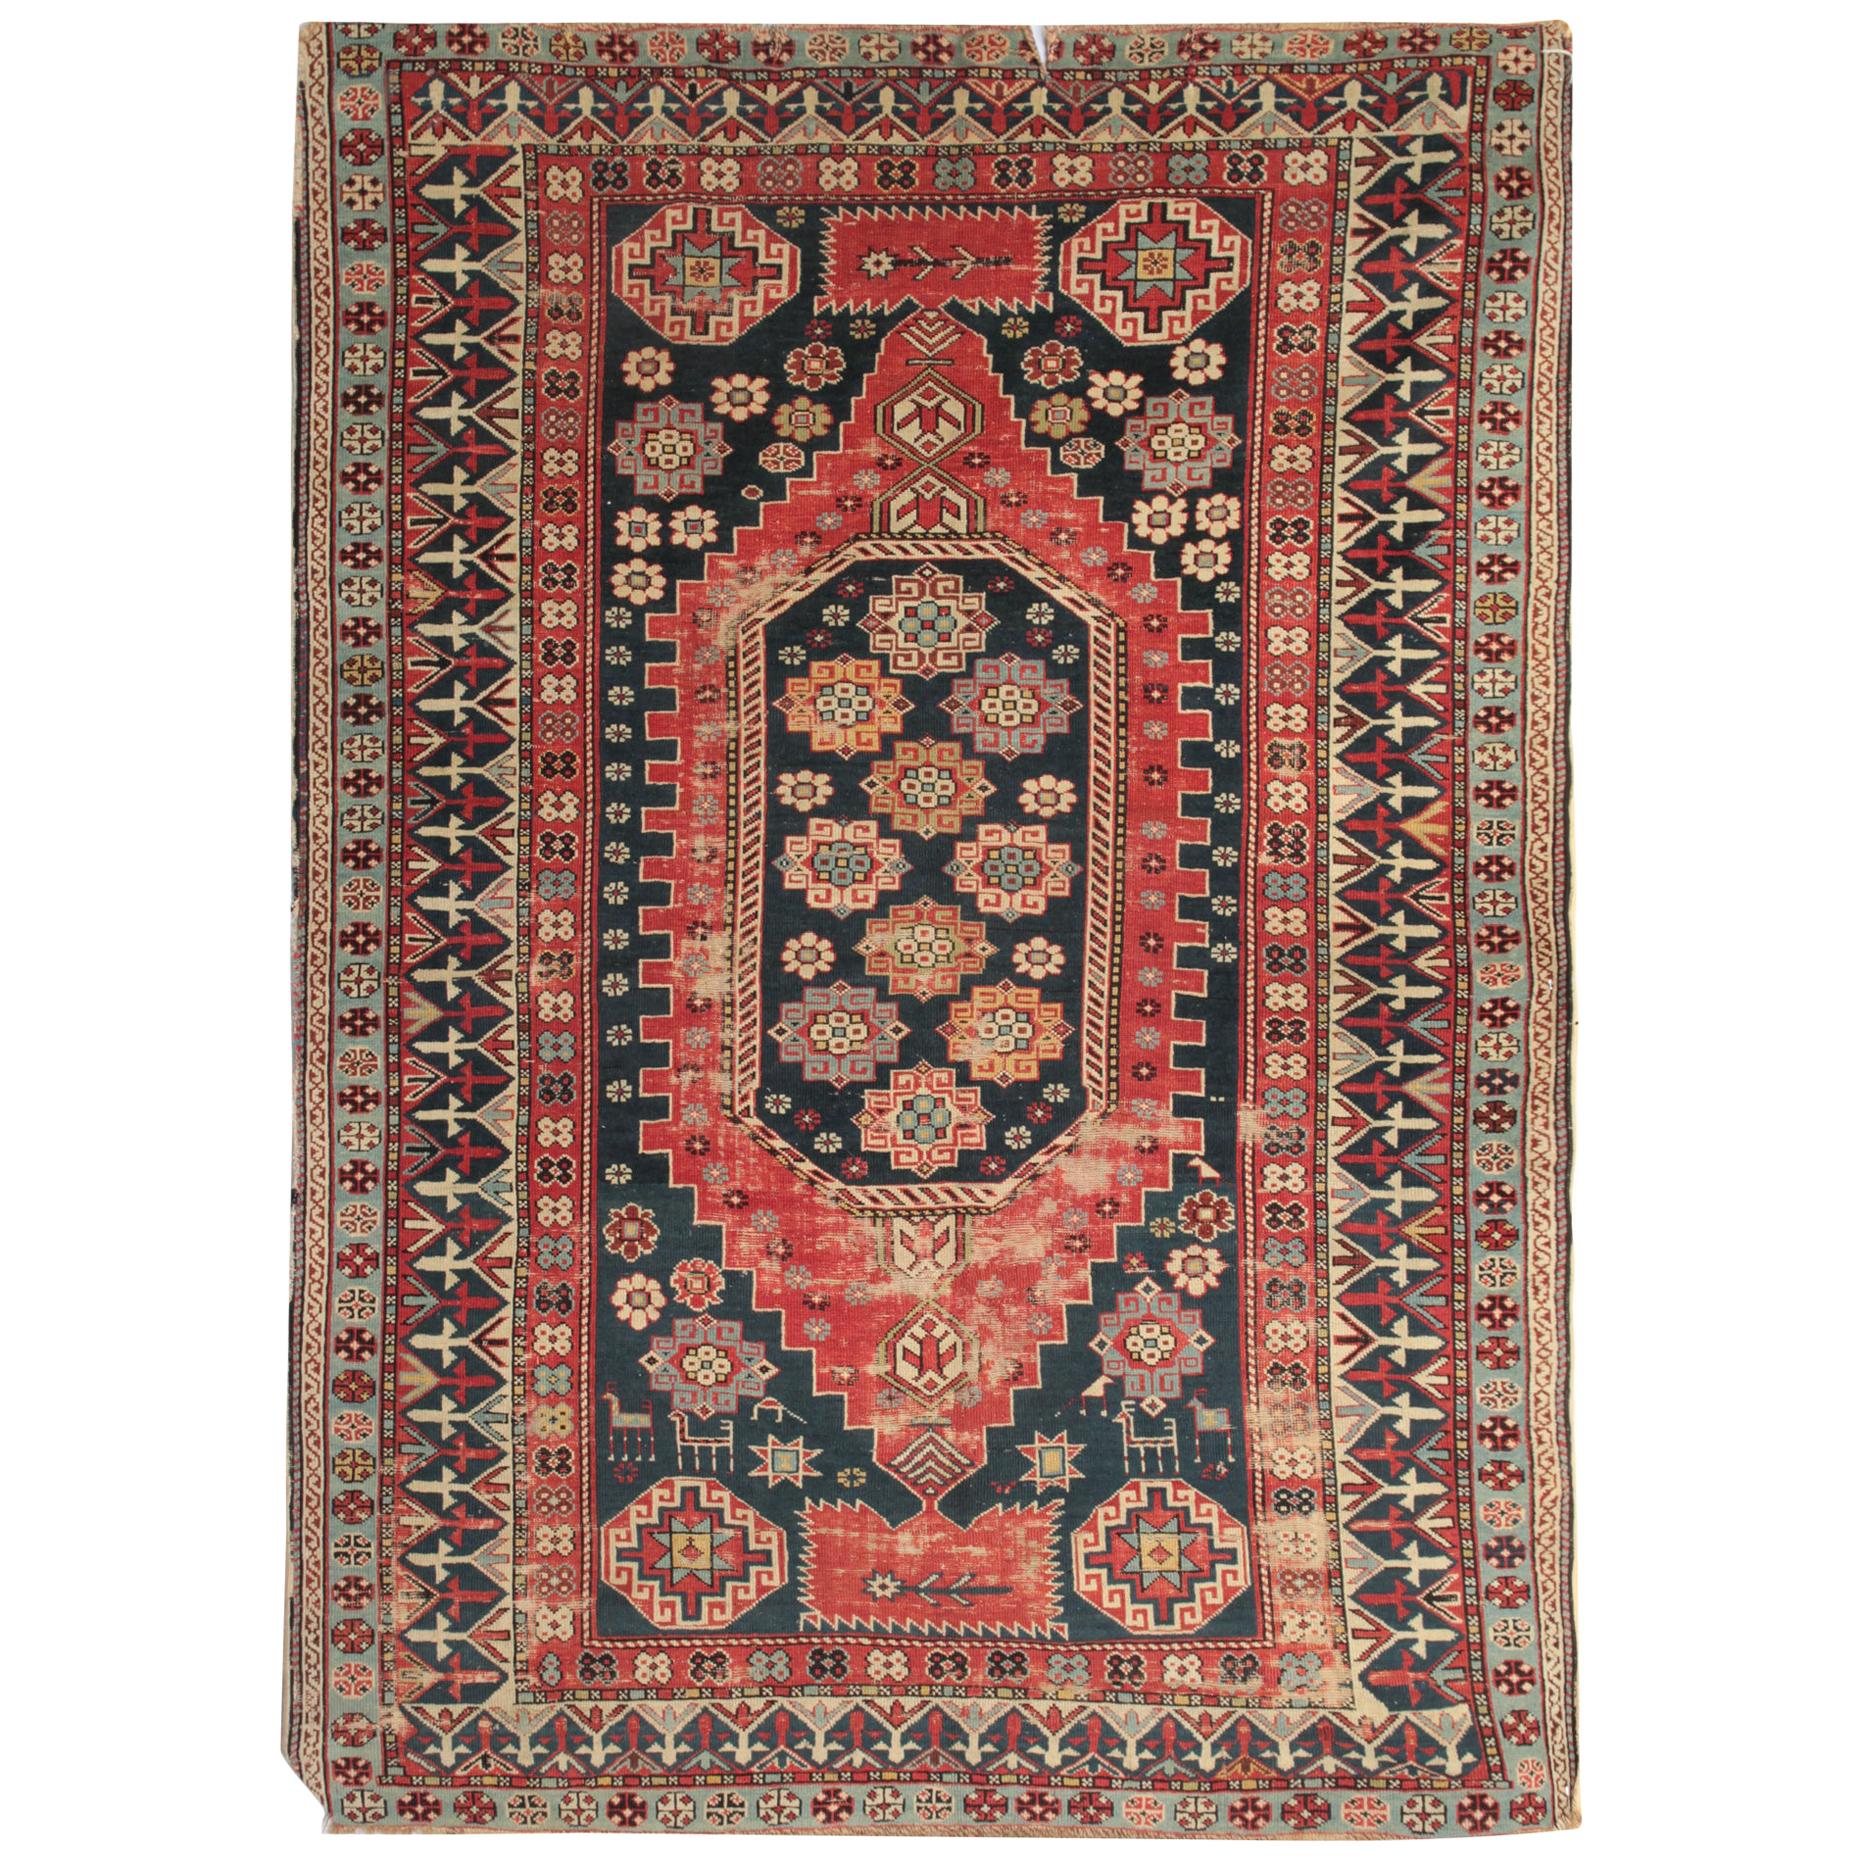 Red Area Rugs for Sale, Antique Rugs Caucasian Carpet, Wool Living Room Rugs For Sale